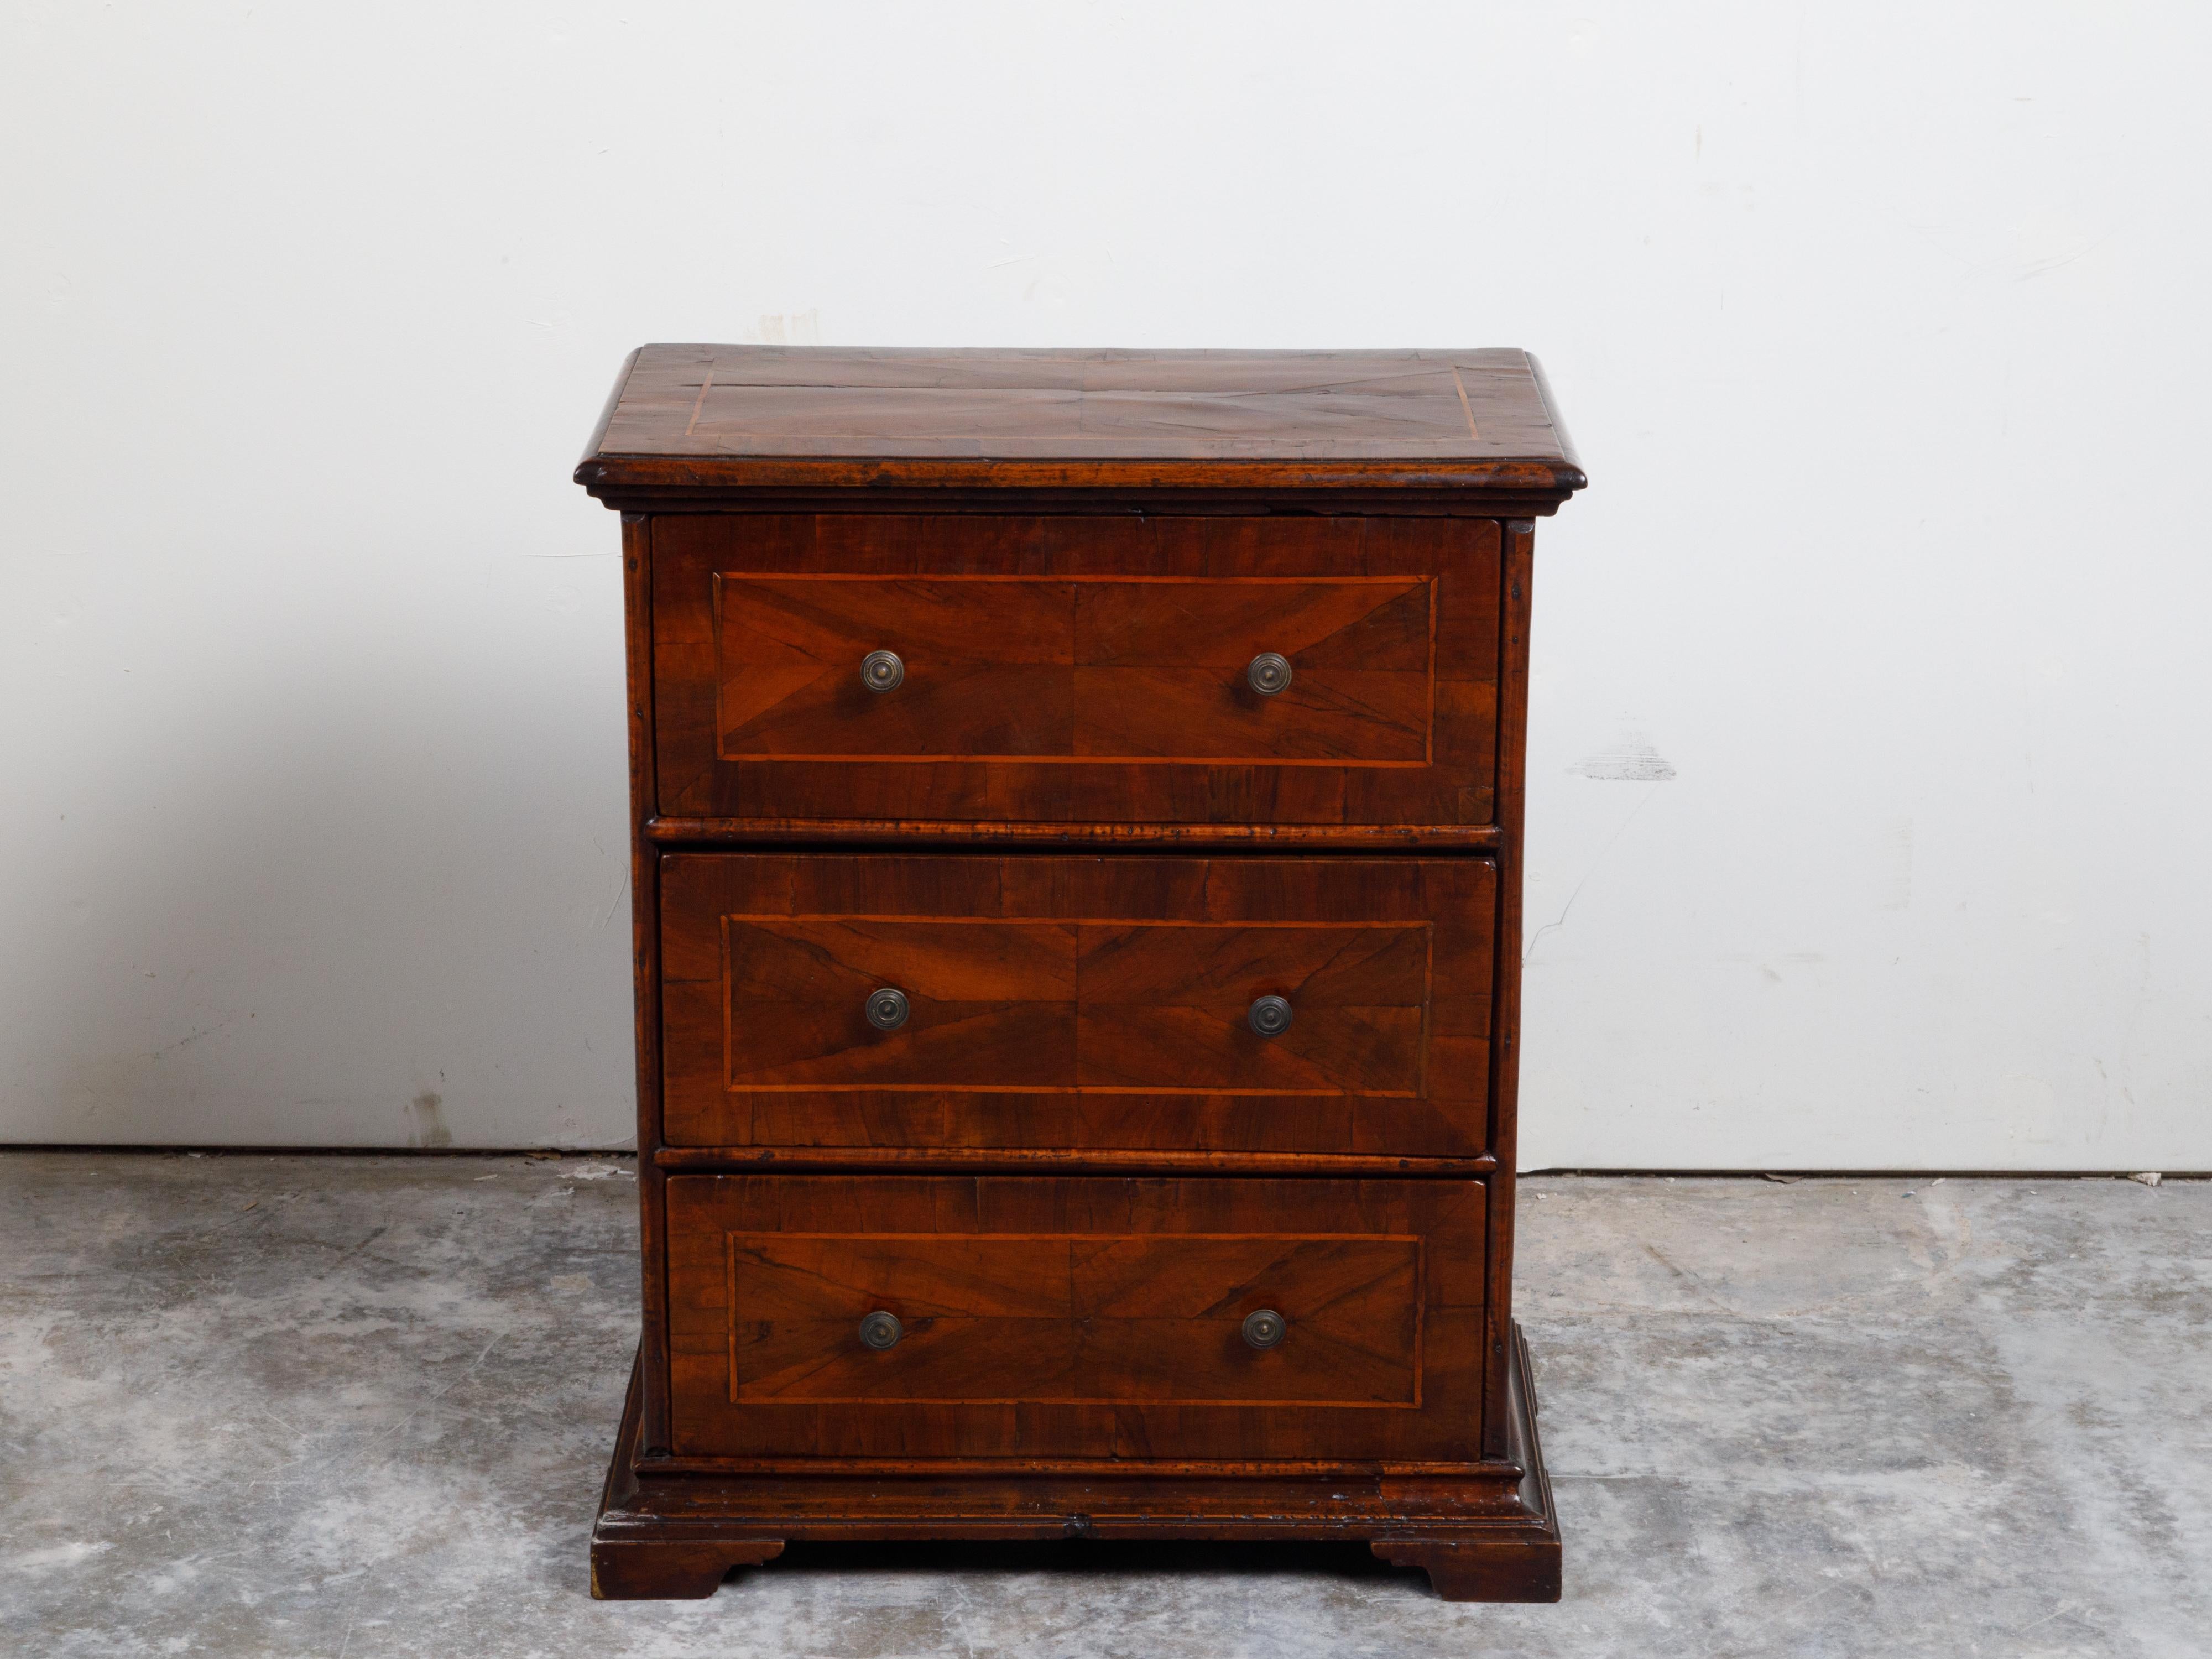 An Italian walnut commode from the 18th century, with three drawers, quarter veneer and banding. Created in Italy during the 18th century, this walnut commode features a rectangular top with quarter veneer and banding, sitting above three drawers